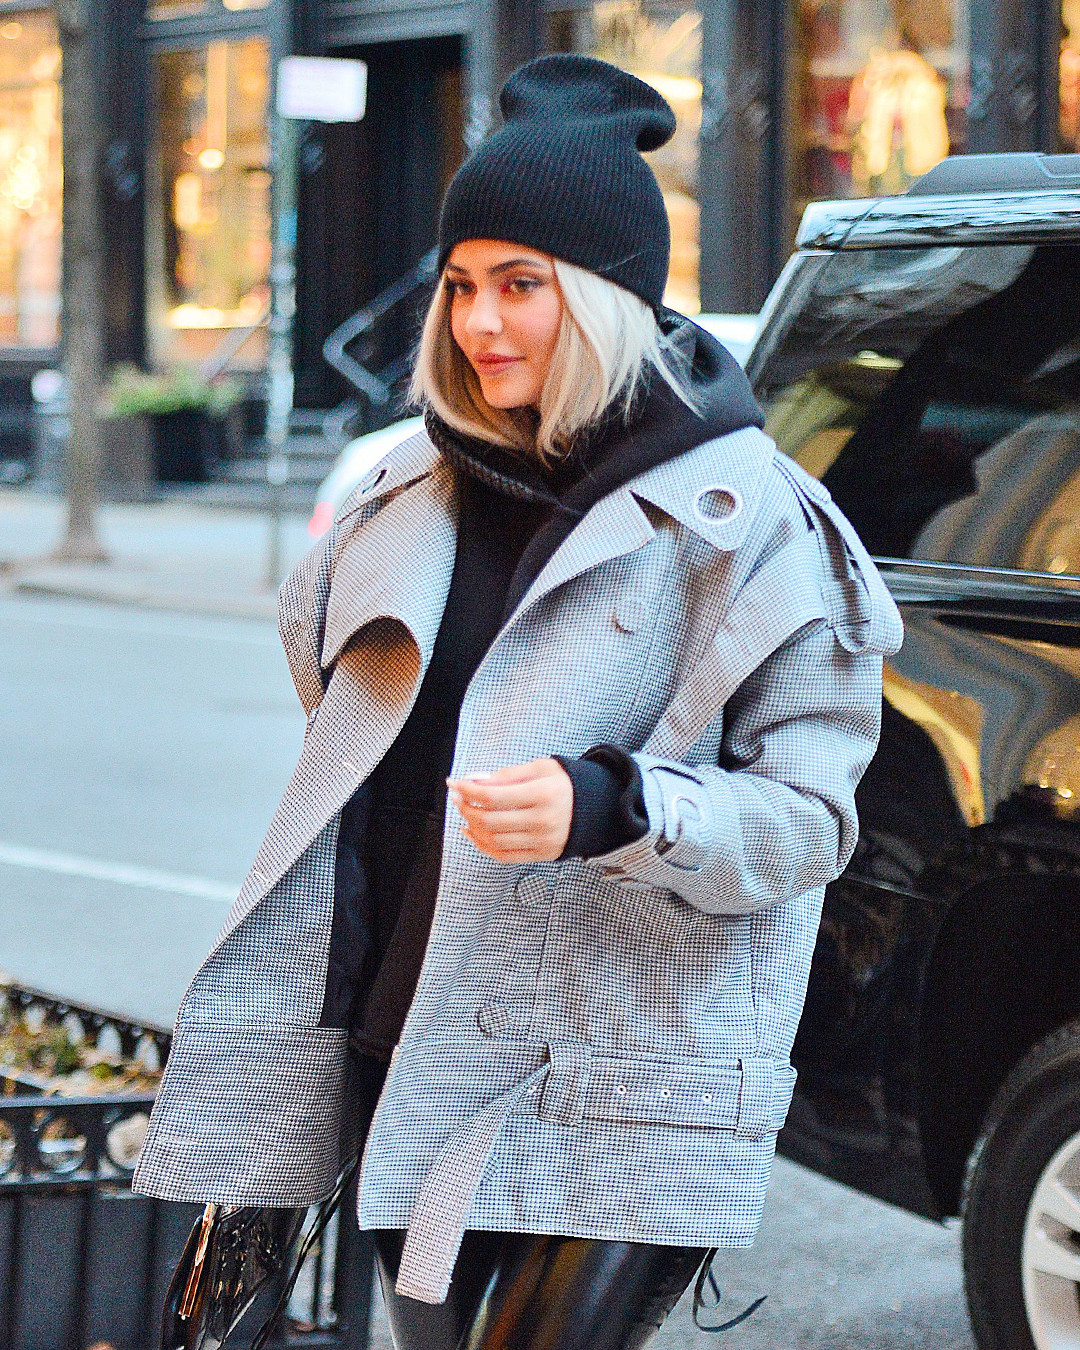 Kylie Jenner's Winter Coats Will Keep You Warm and Make You Look Hot